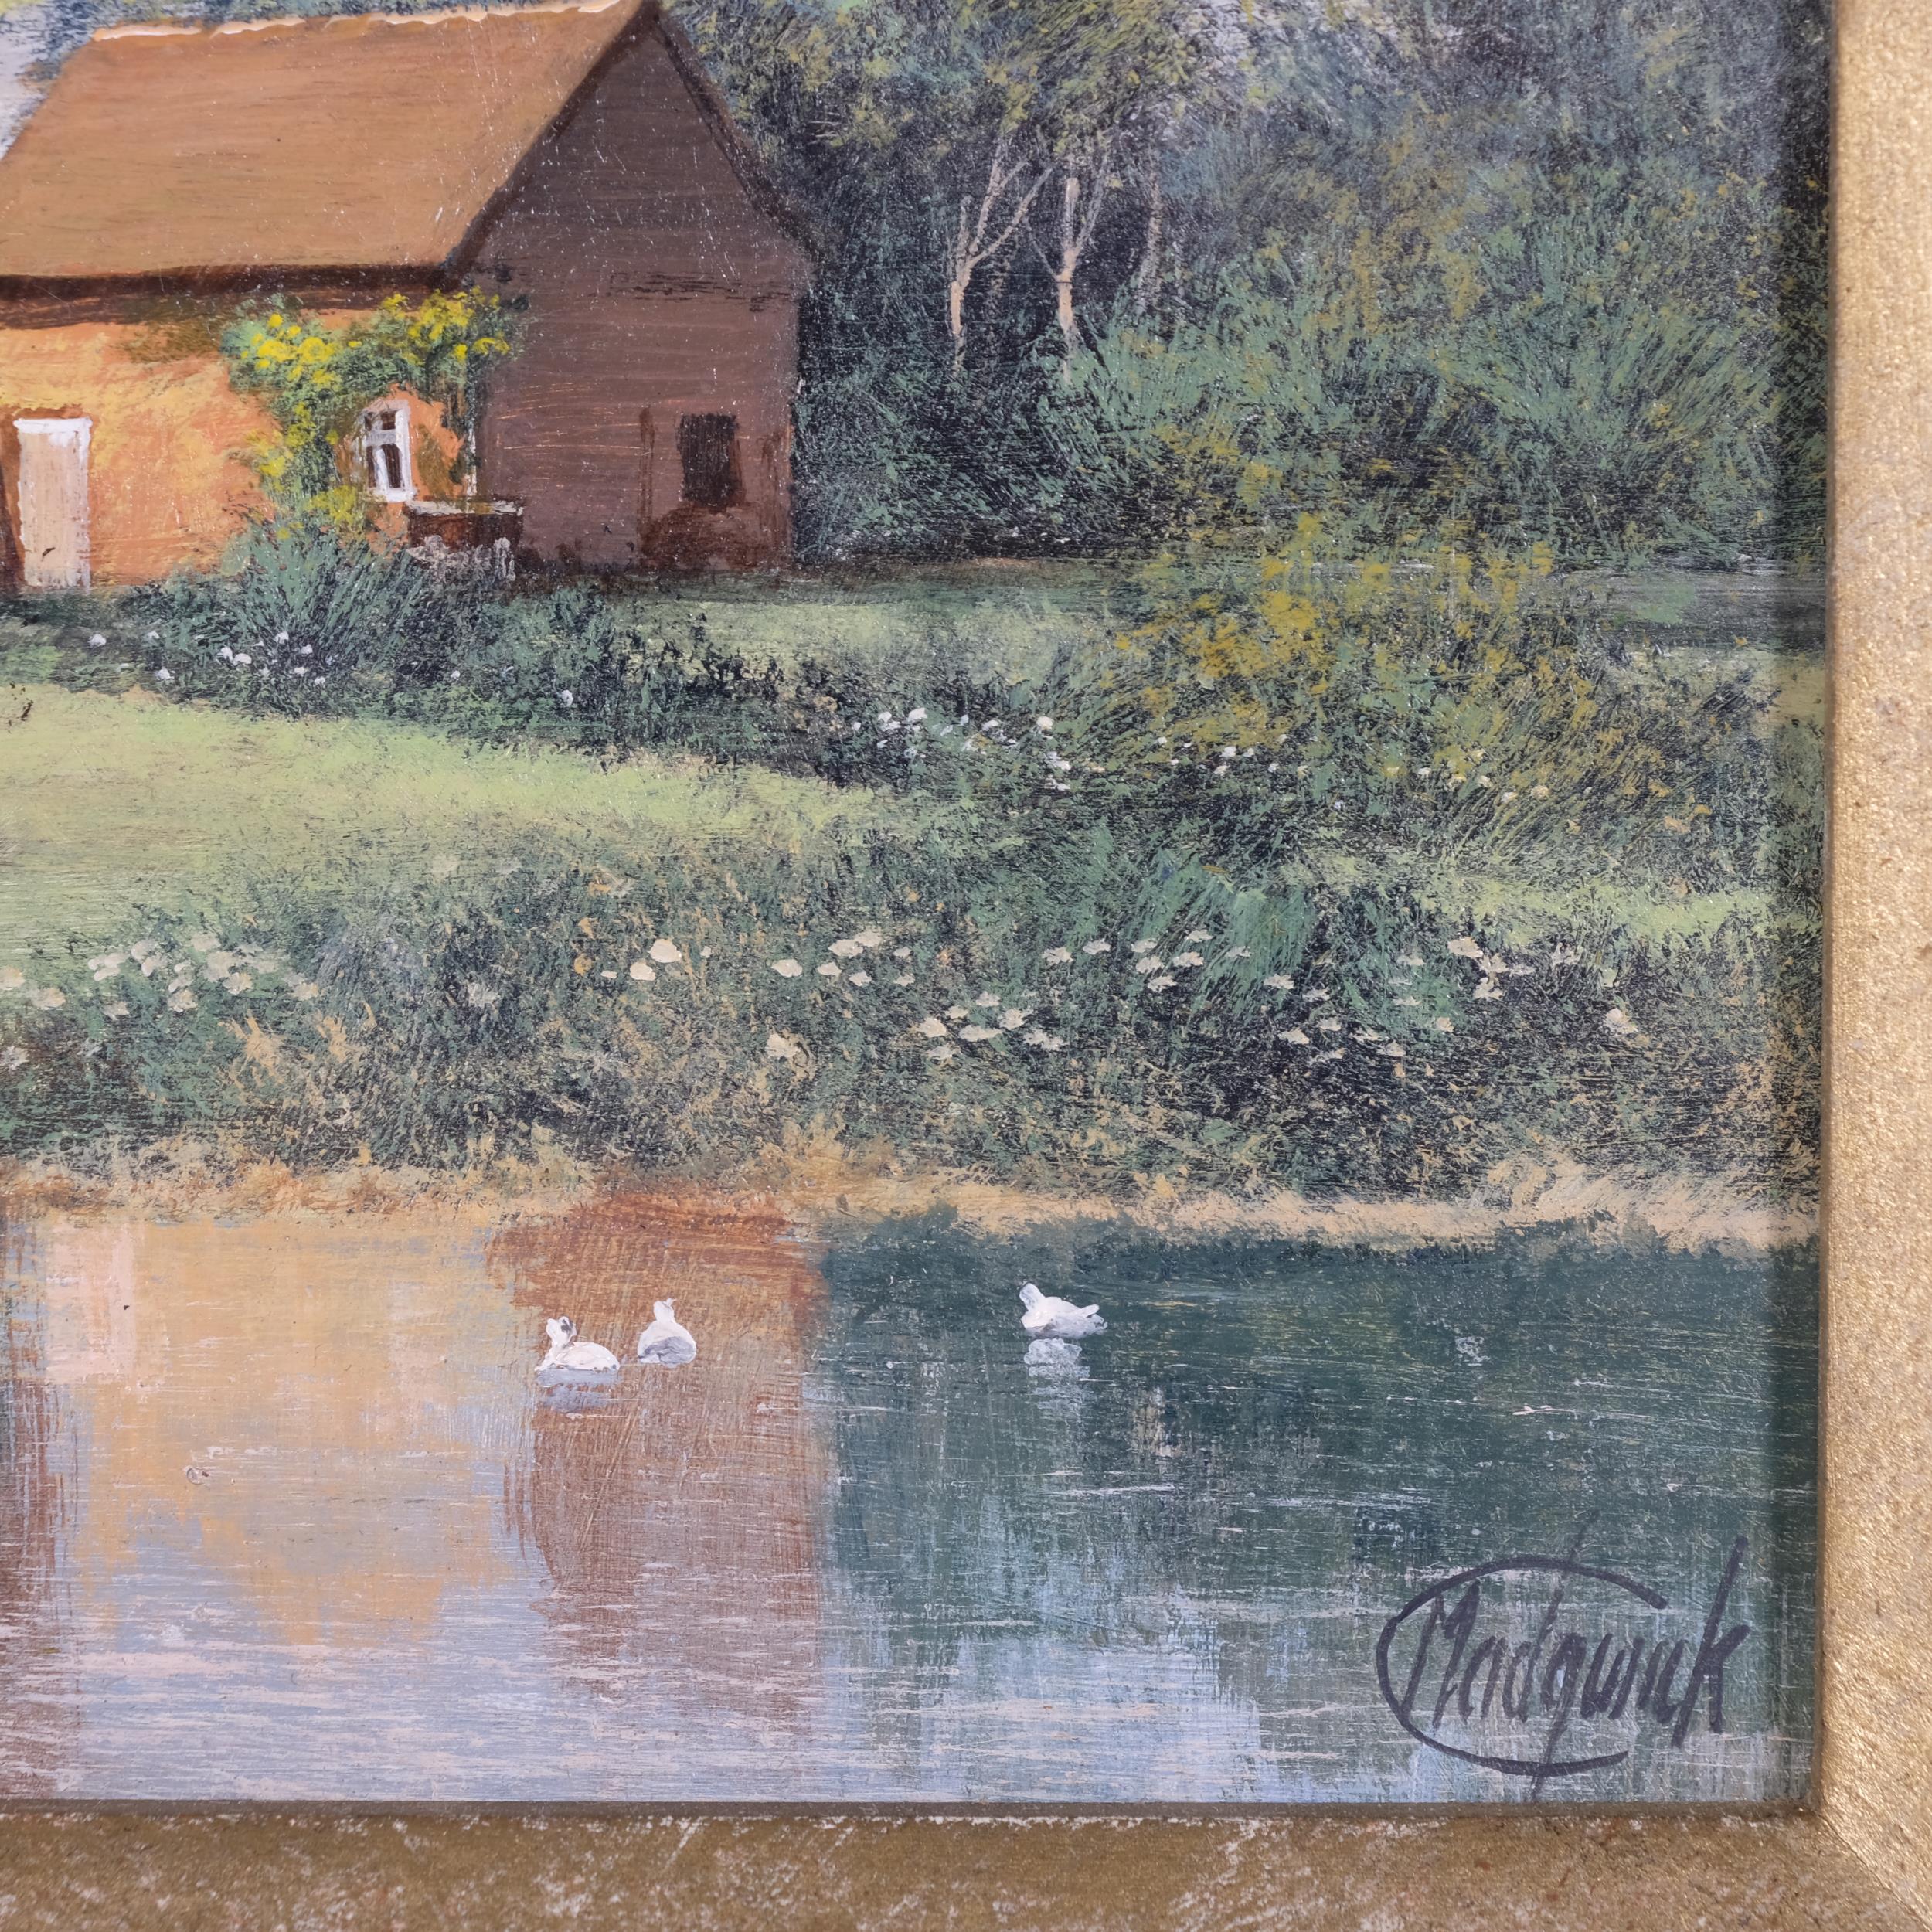 Clive Madgwick (1934 - 2005), Kent farm scene near Biddenden, oil on board, signed, 20cm x 30cm, - Image 3 of 4